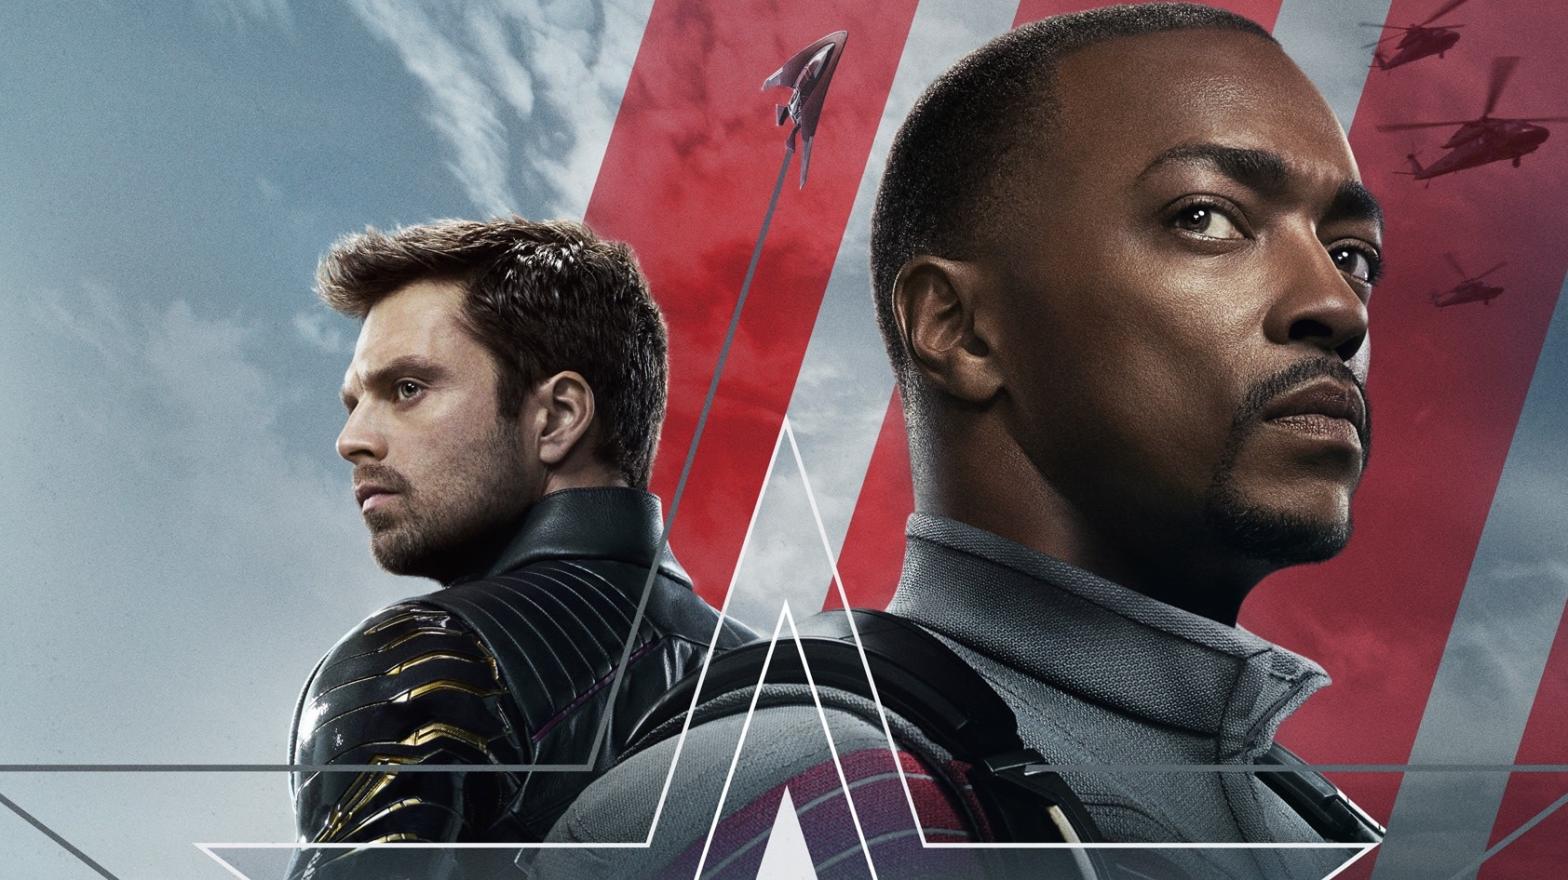 Falcon and Winter Soldier are back. (Image: Disney+)